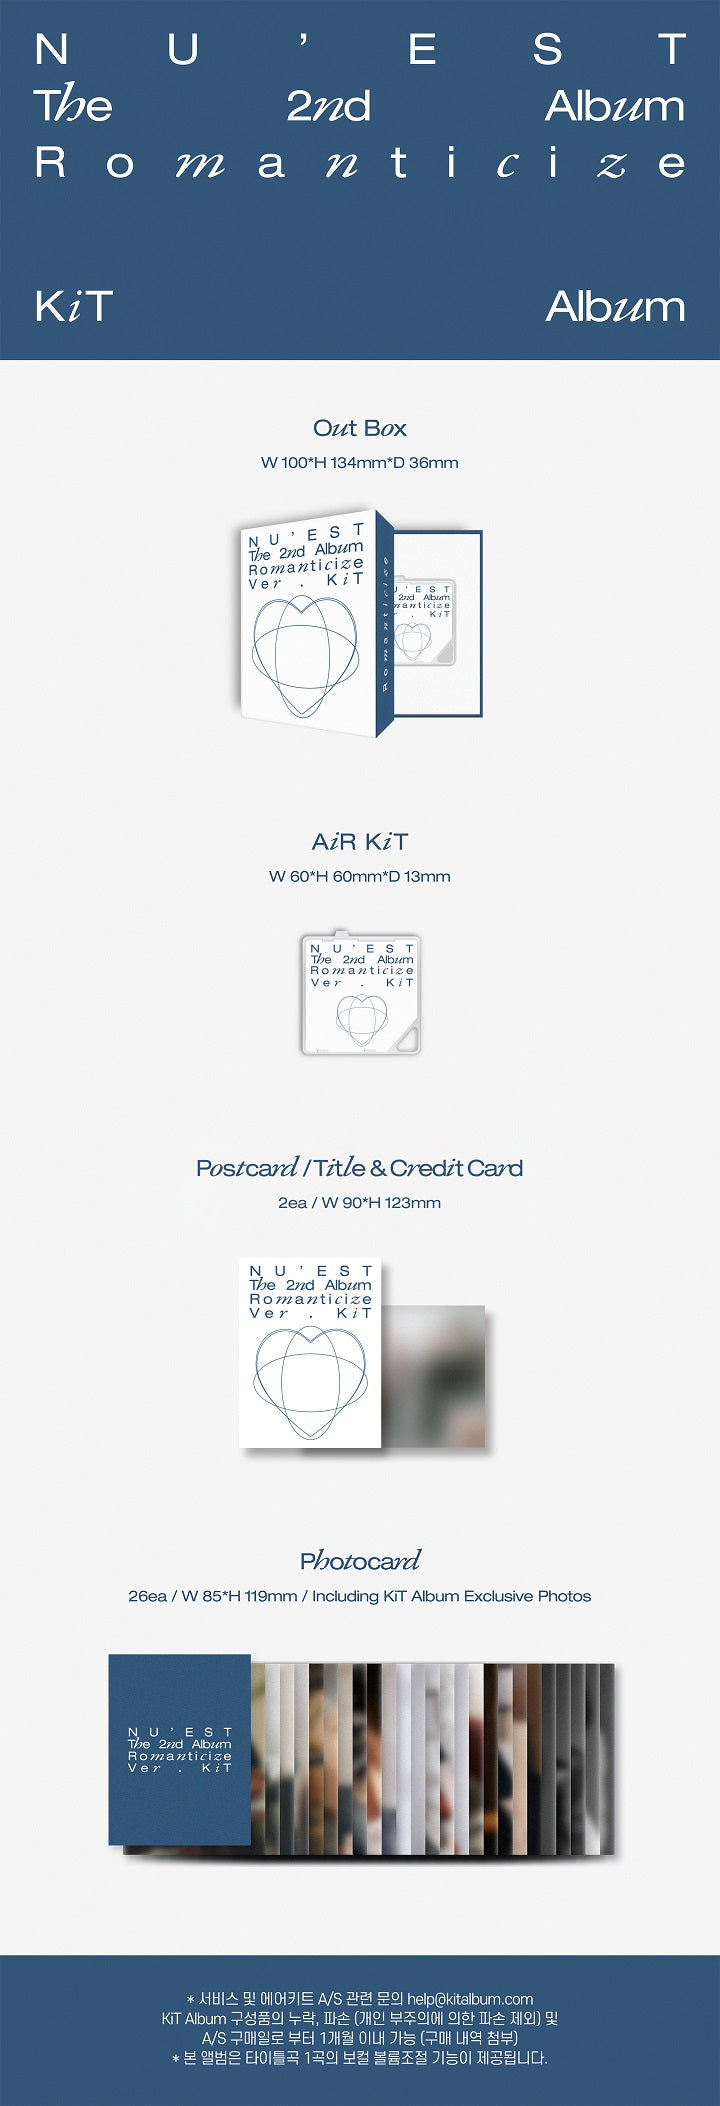 1 Air-KiT
1 Title & Credit Card
26 Photo Cards